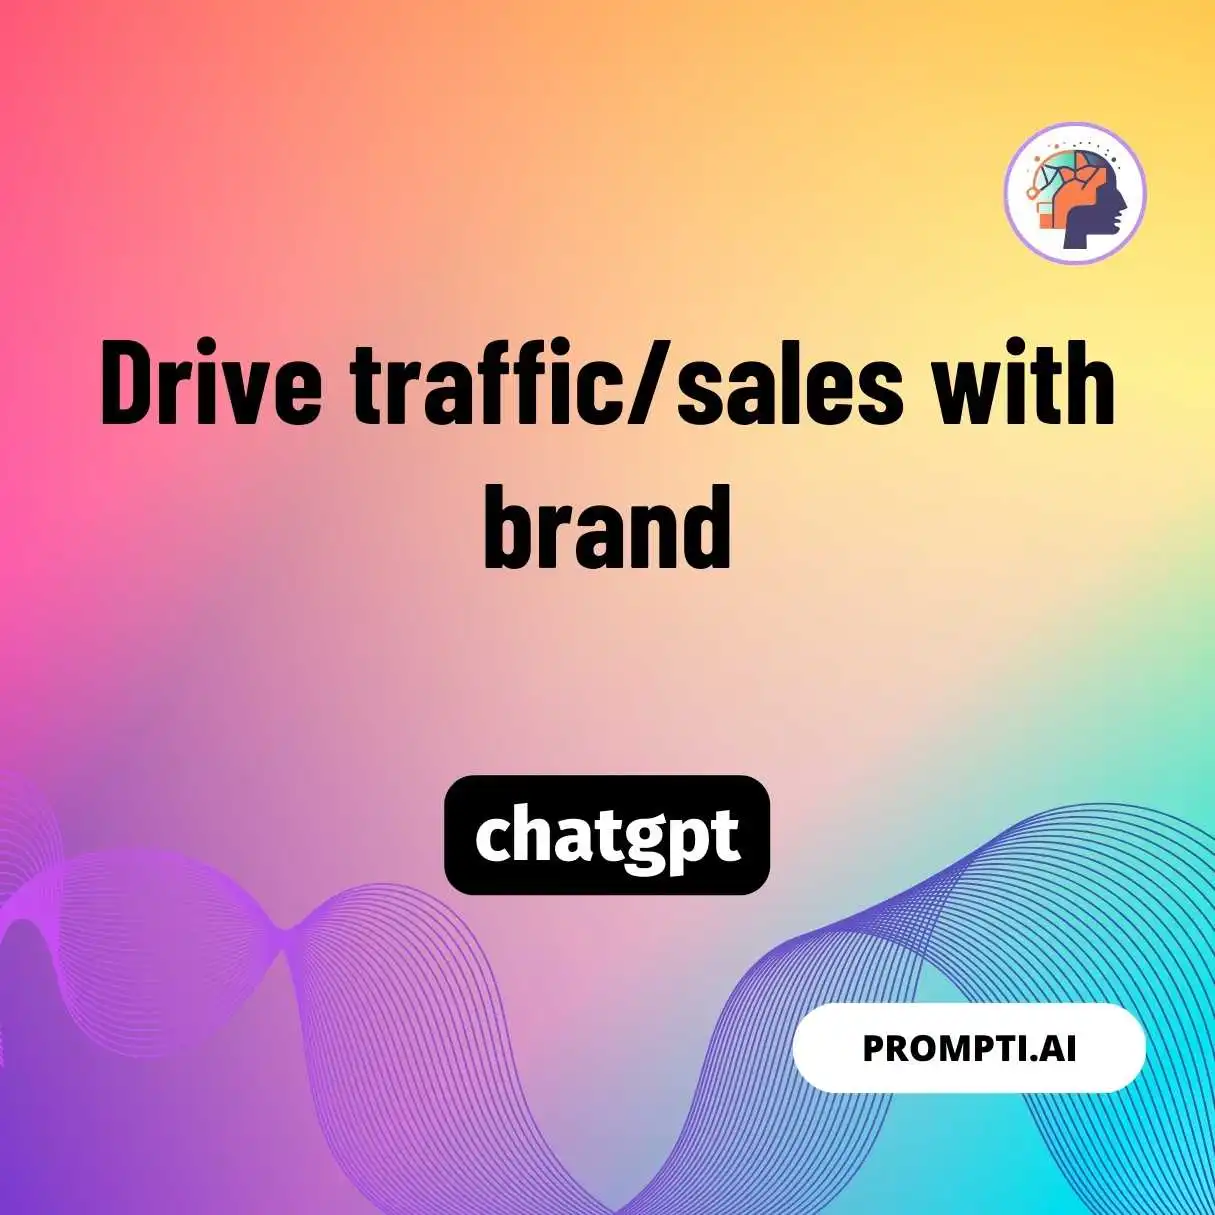 Drive traffic/sales with brand